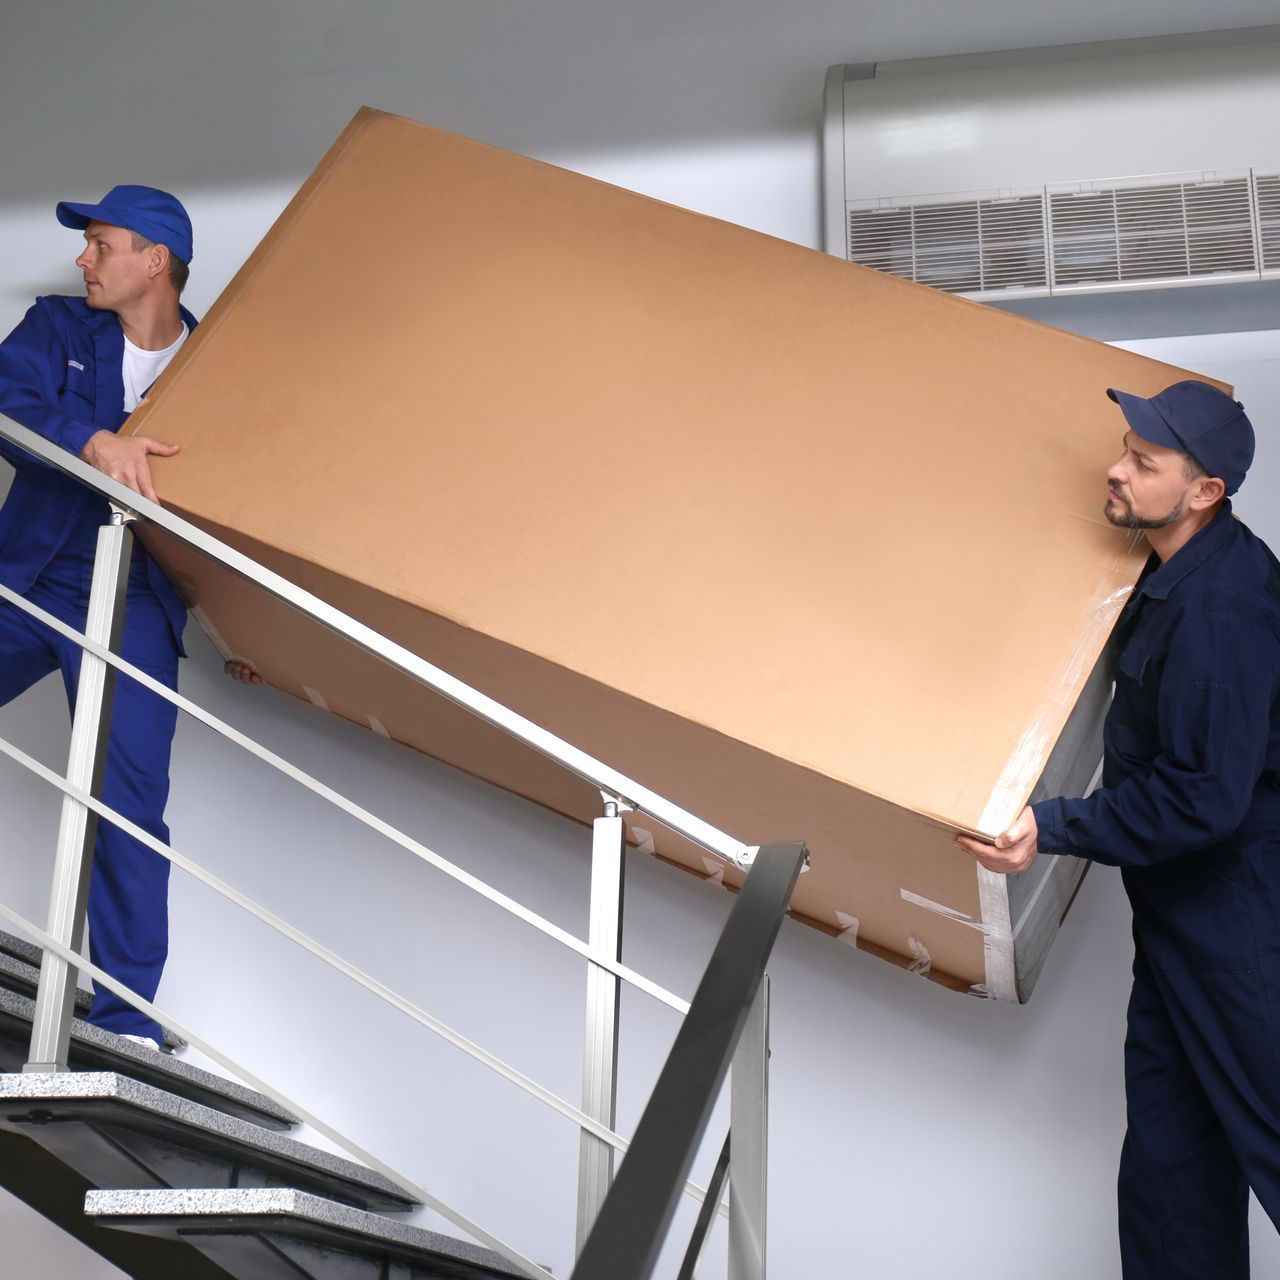 two men are carrying a large cardboard box up a set of stairs .